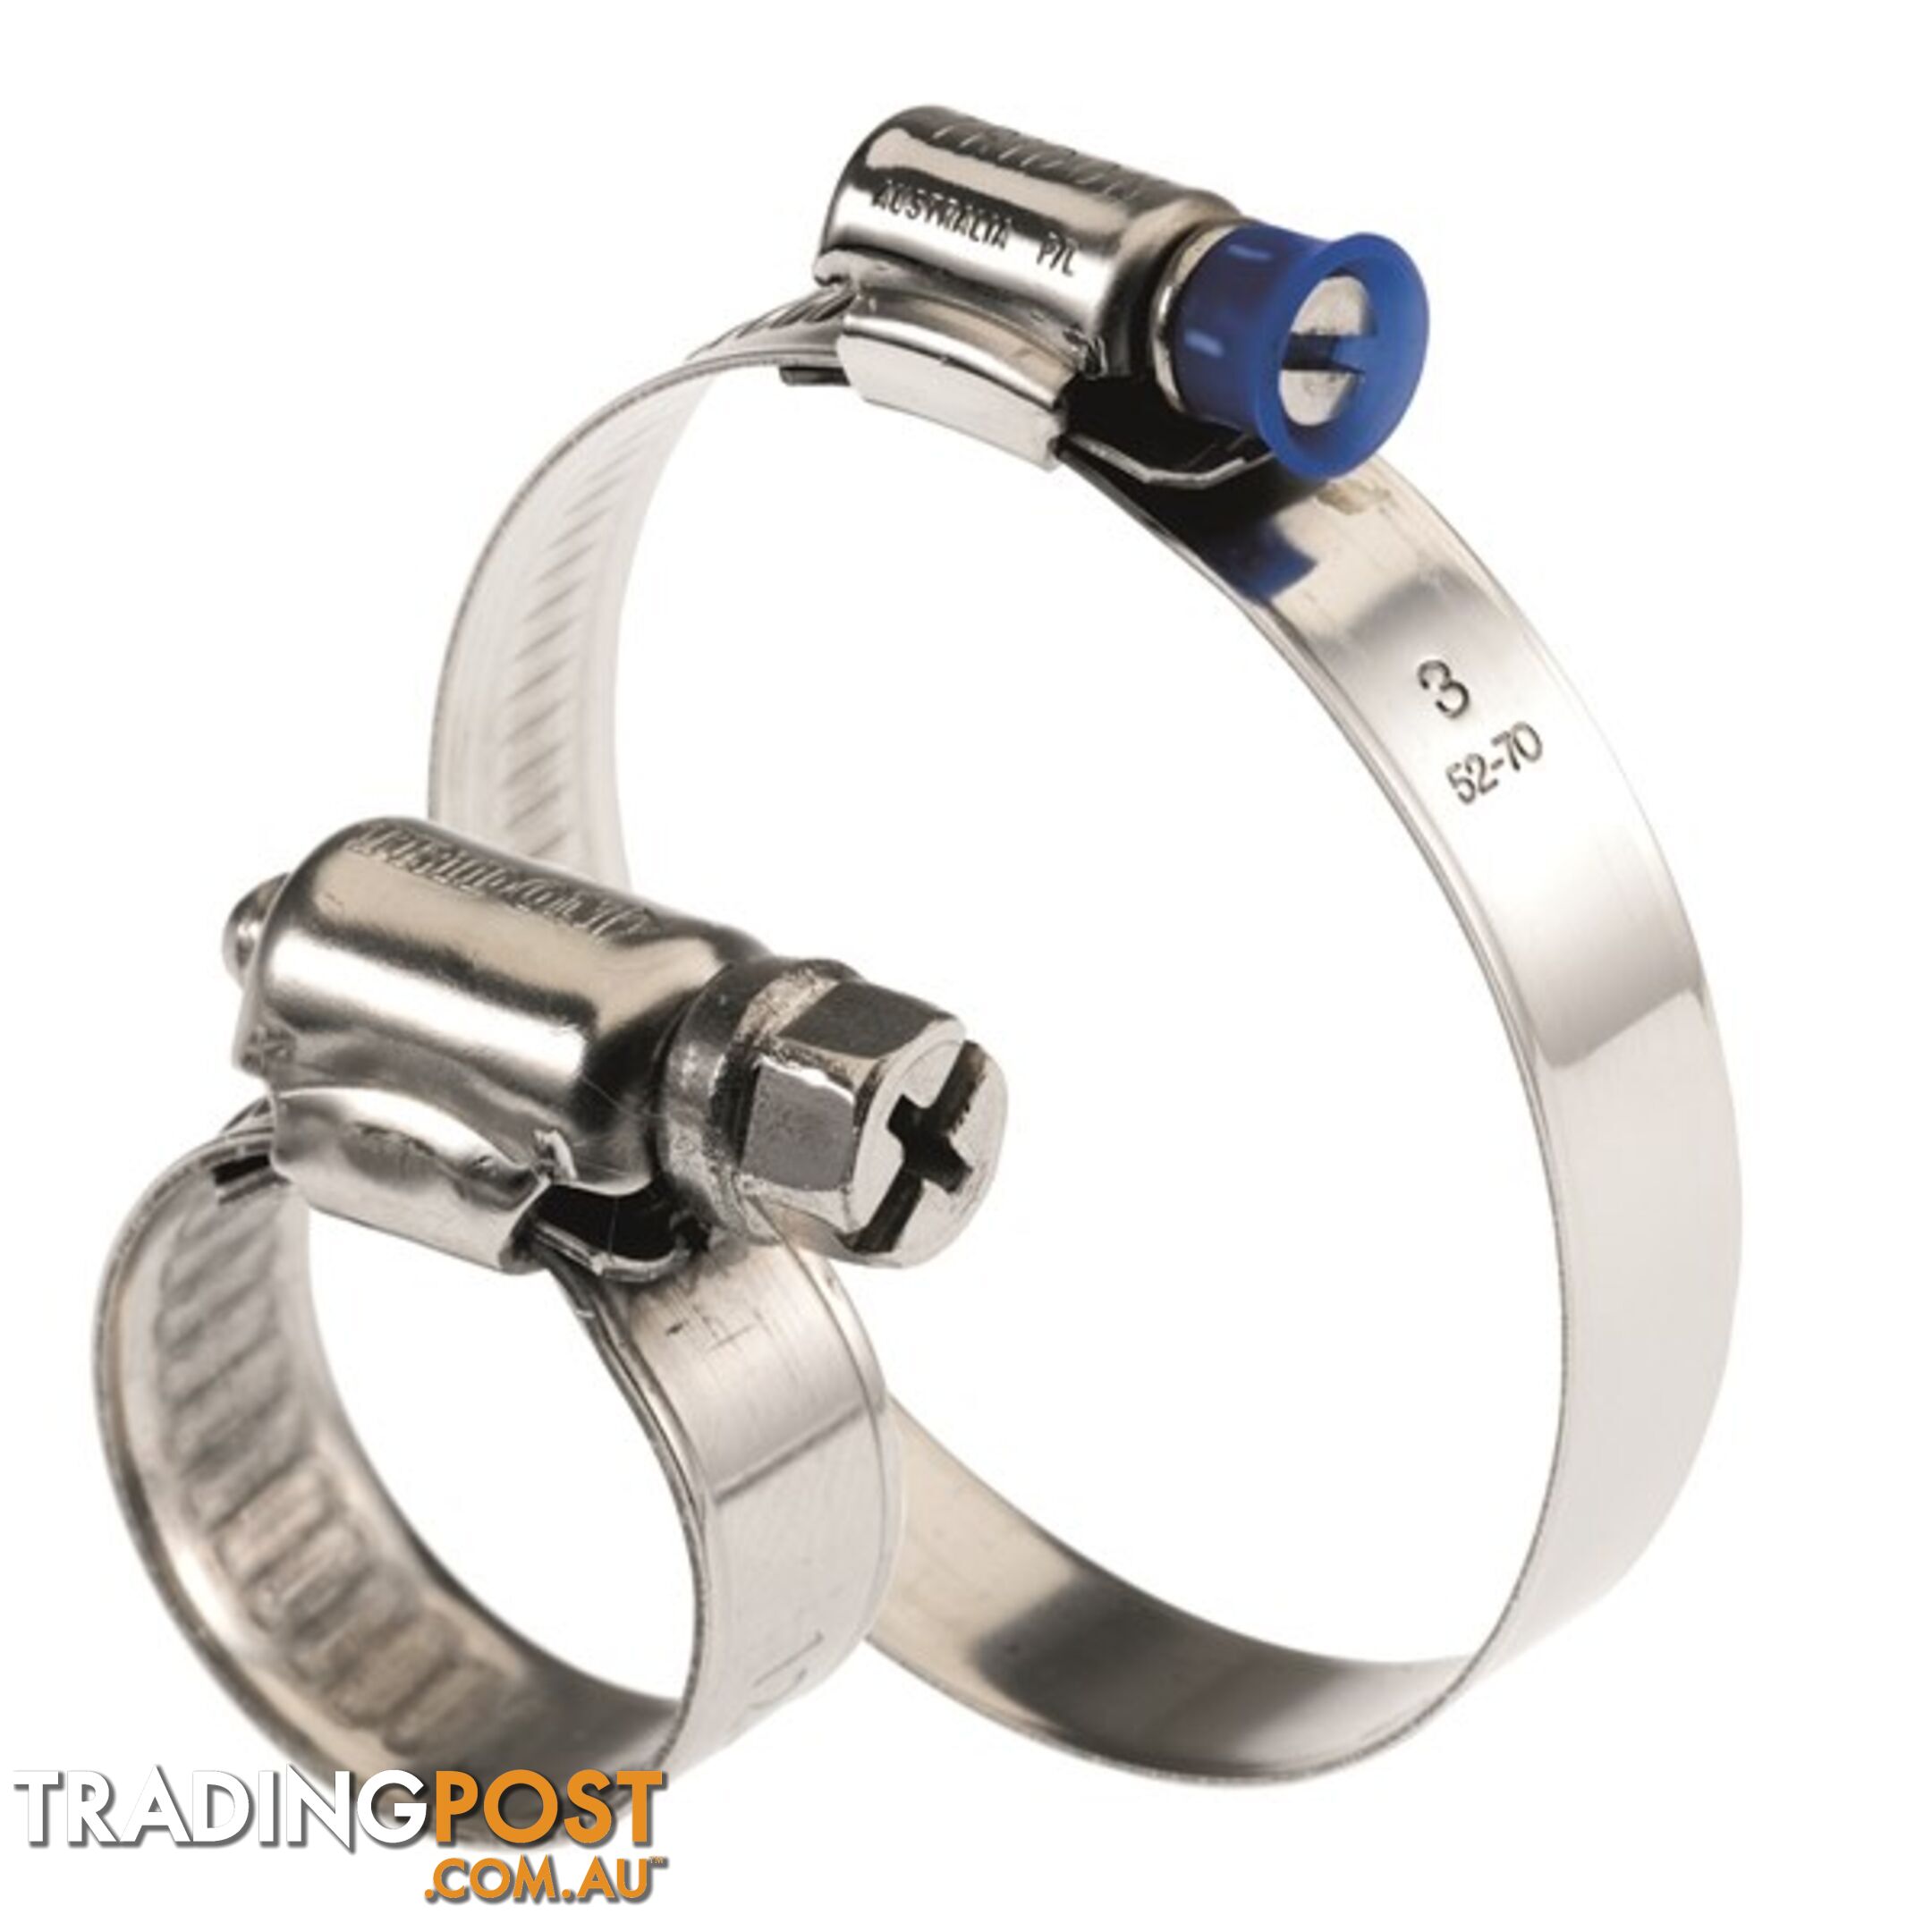 Tridon Hose Clamp 13 -20mm Solid Micro Band Collared (8mm wide) Full S. Steel 10pk SKU - SMPC00P